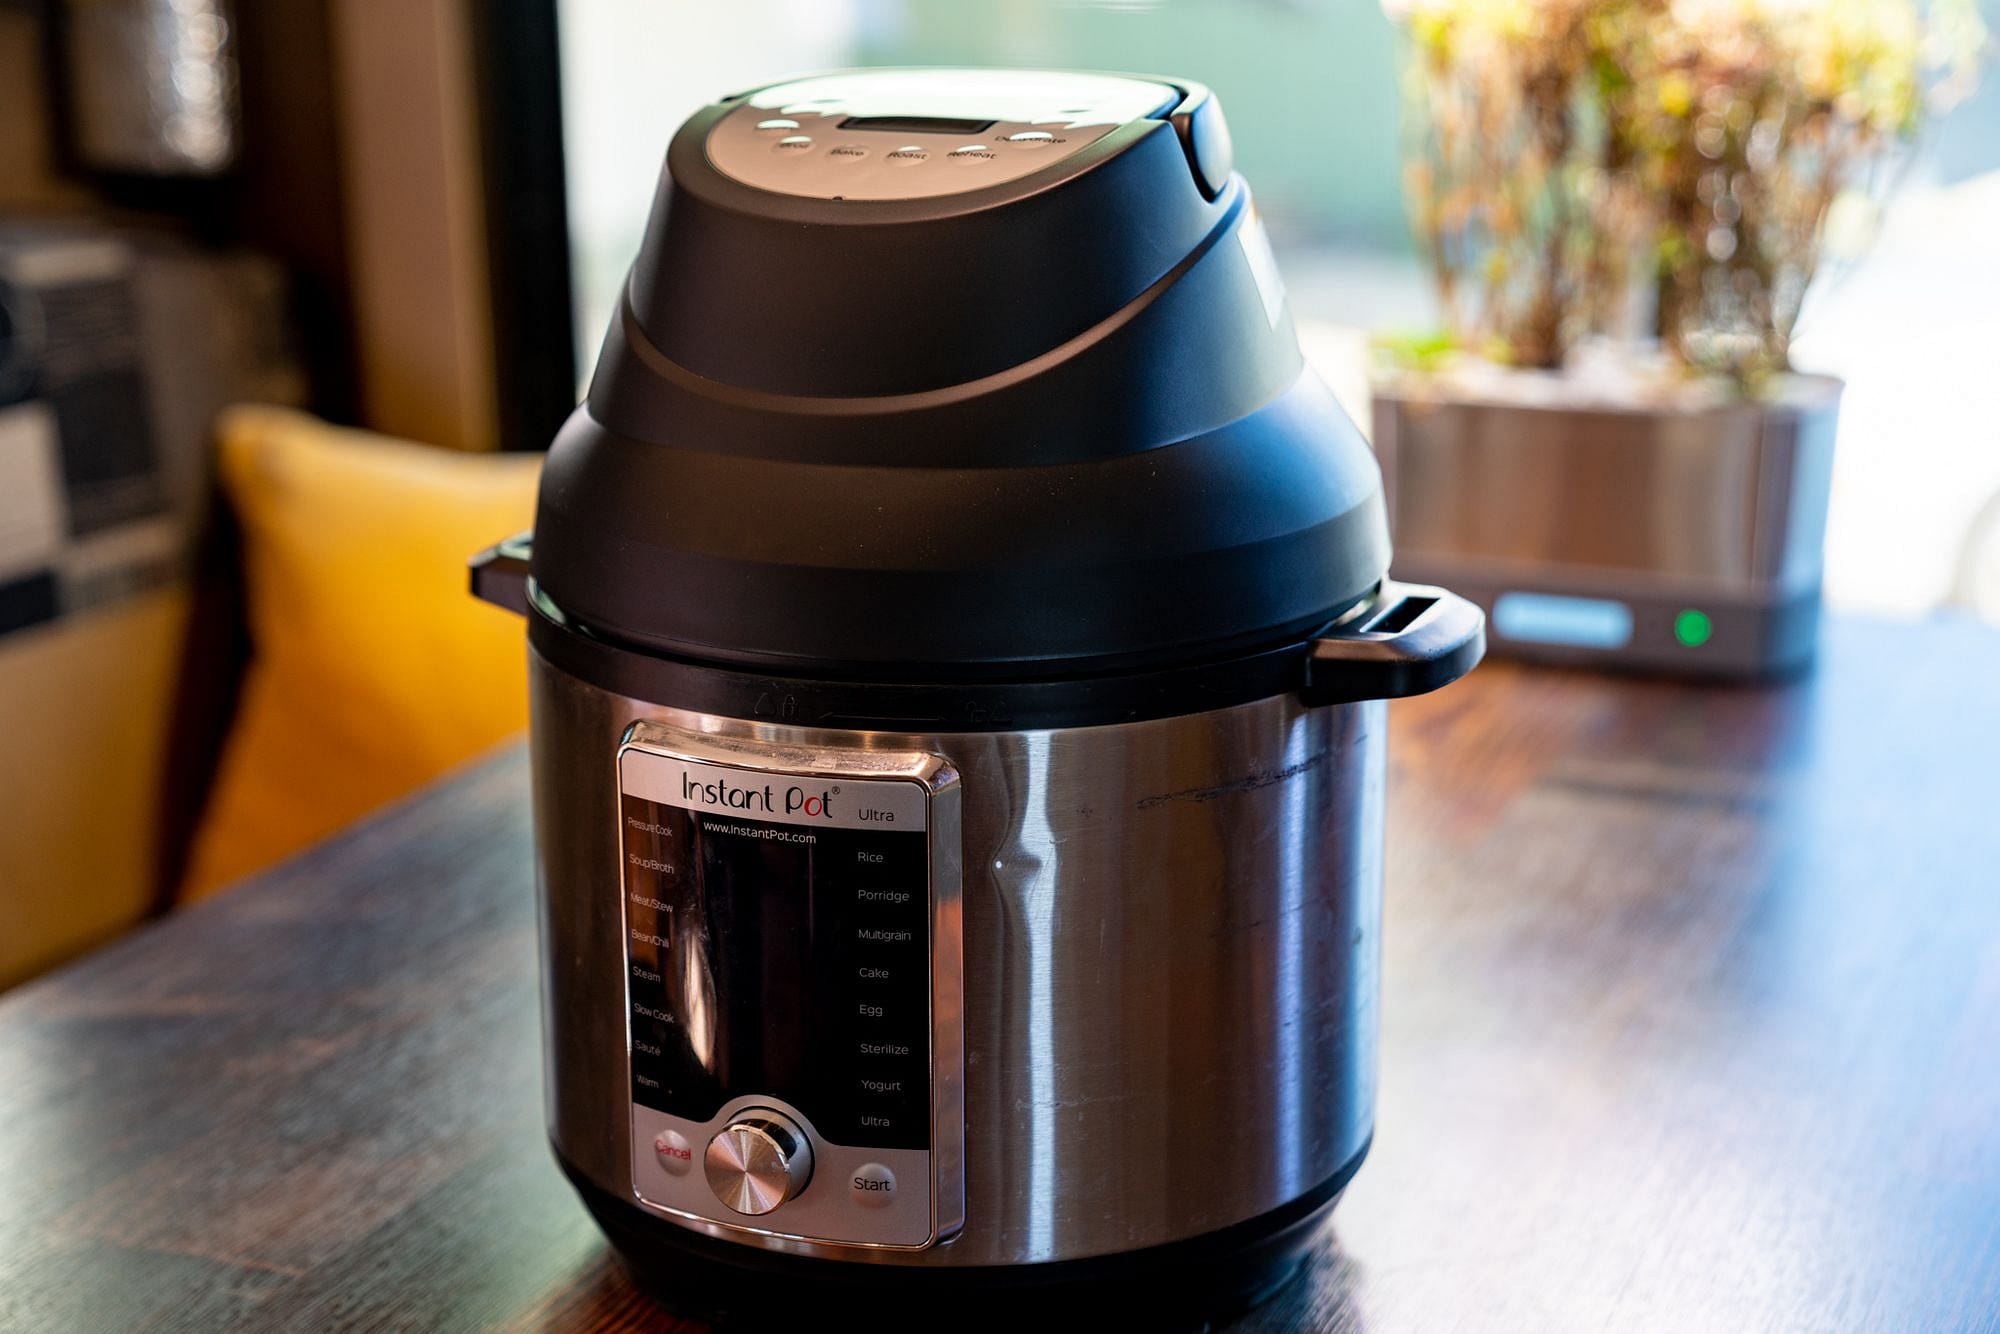 We Tested The Instant Pot Air Fryer. Here Is Our Honest Review!